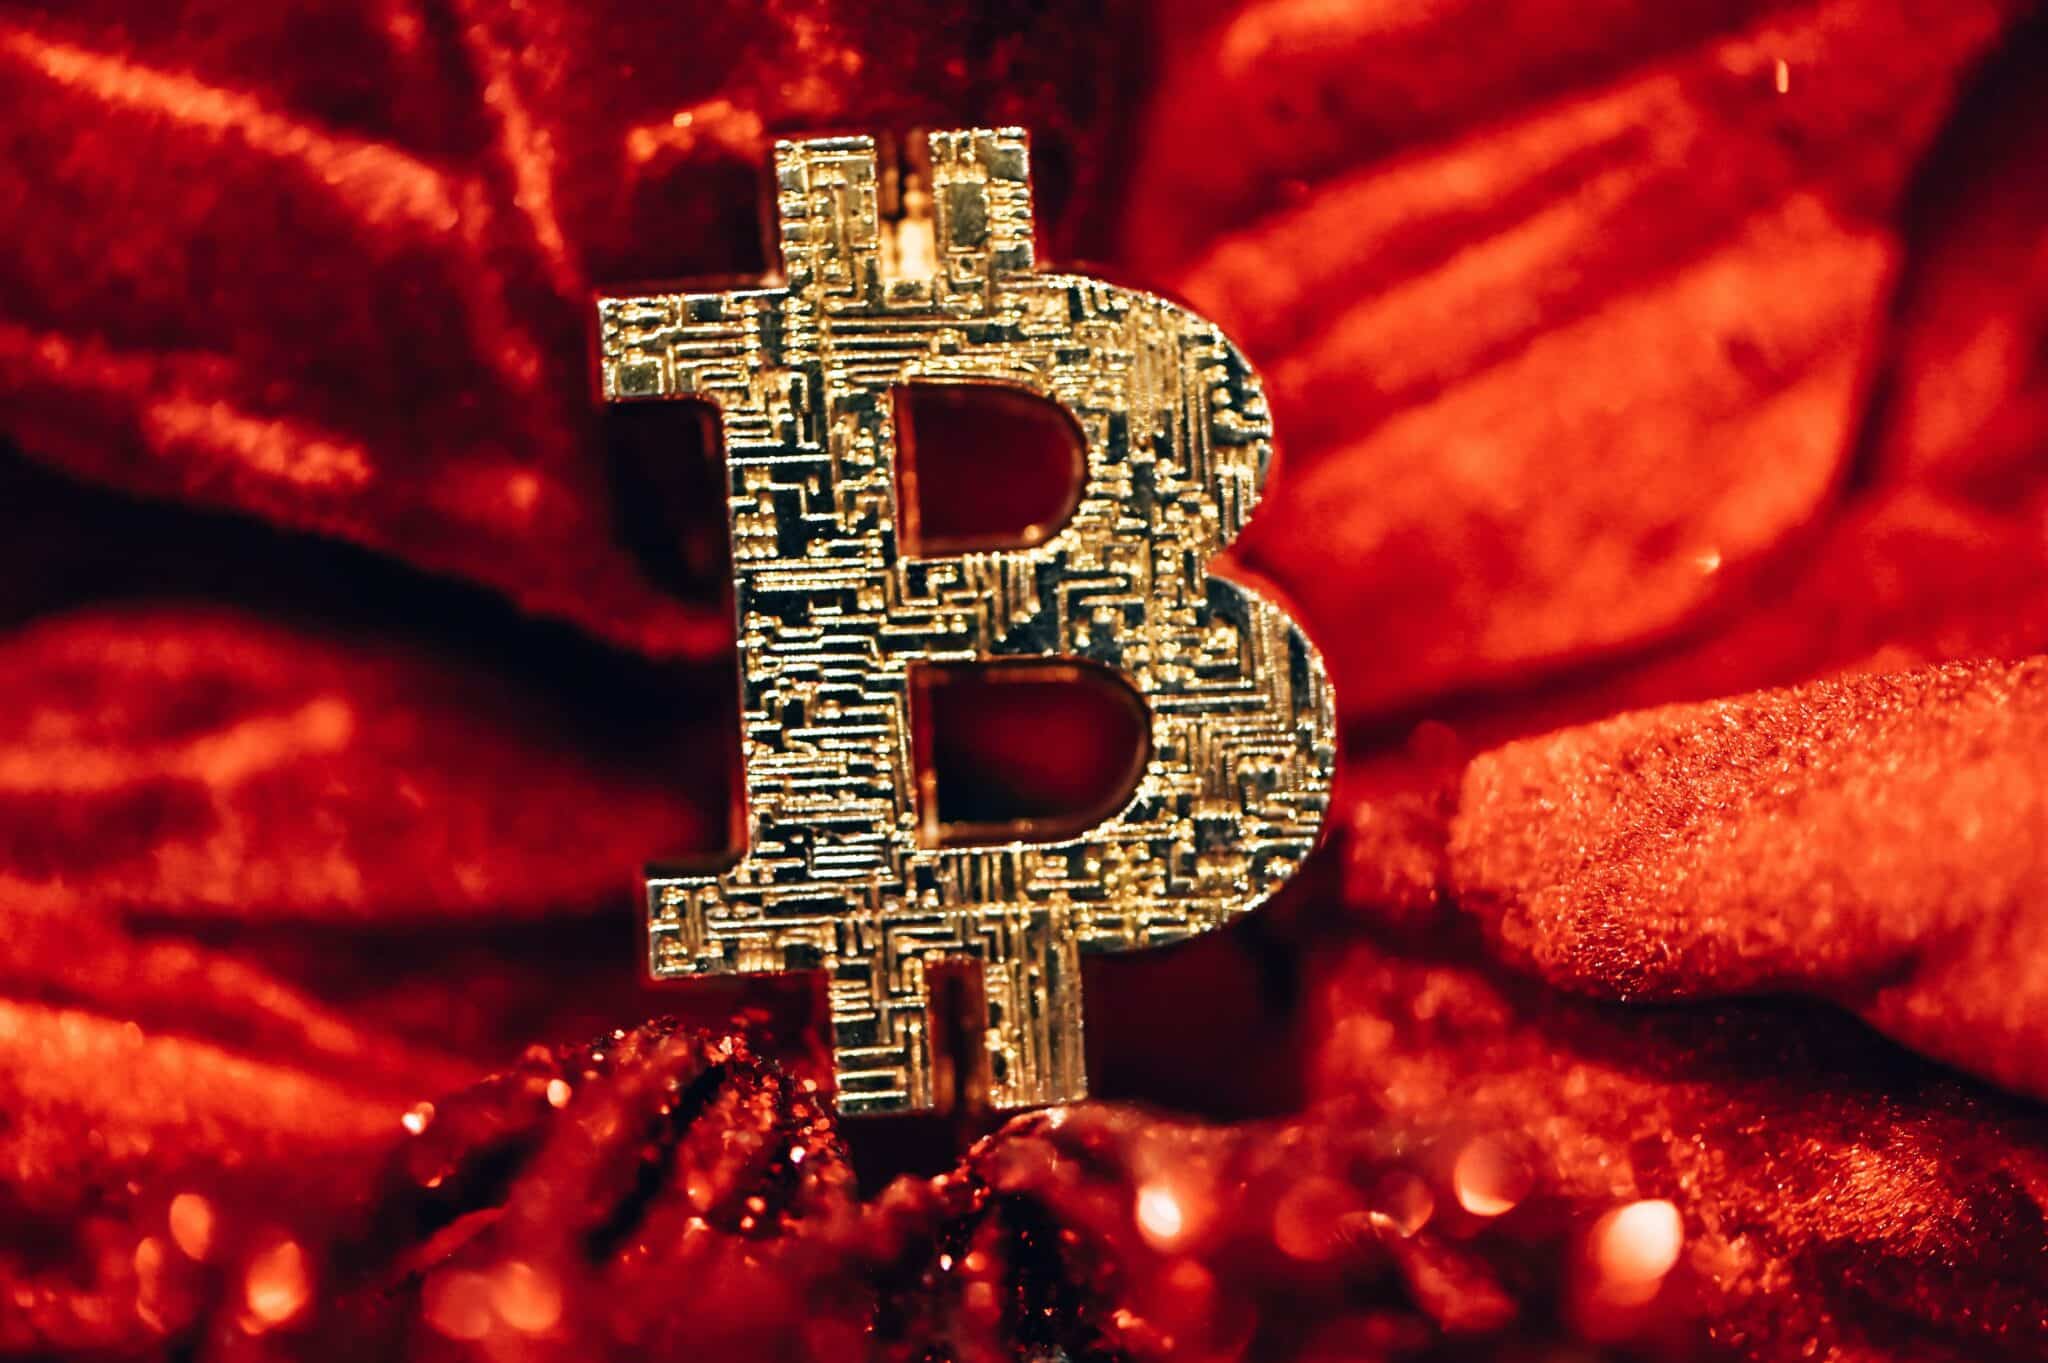 A Bitcoin symbol on a red velvet background